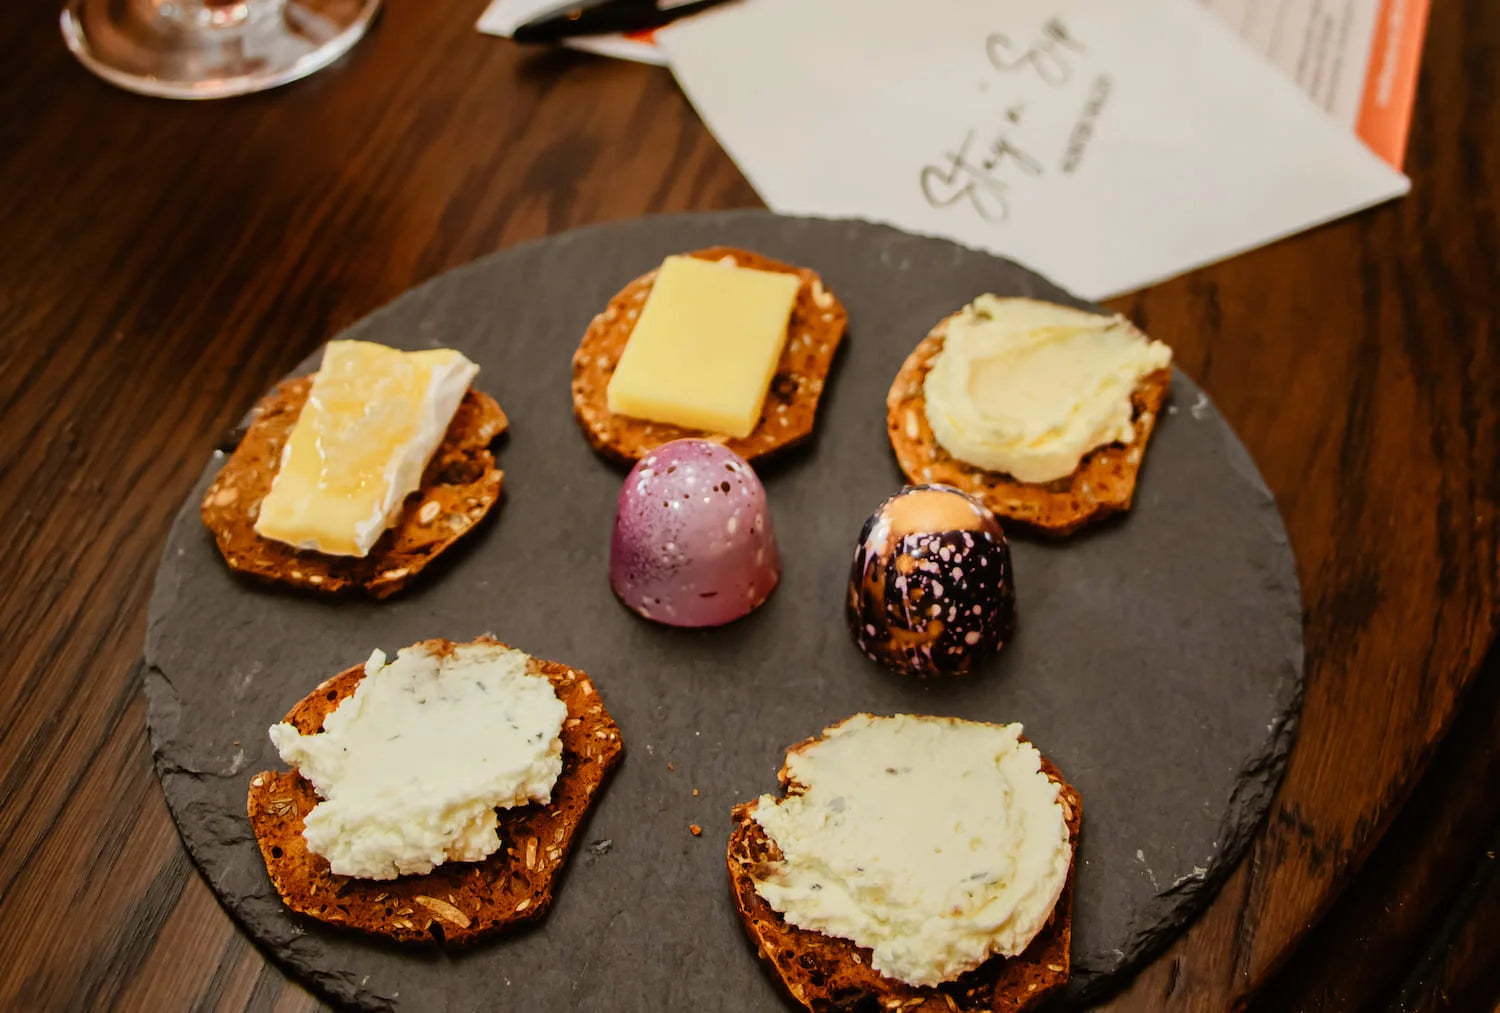 Plate with five crackers topped with cheese and two handmade chocolate bon bons.